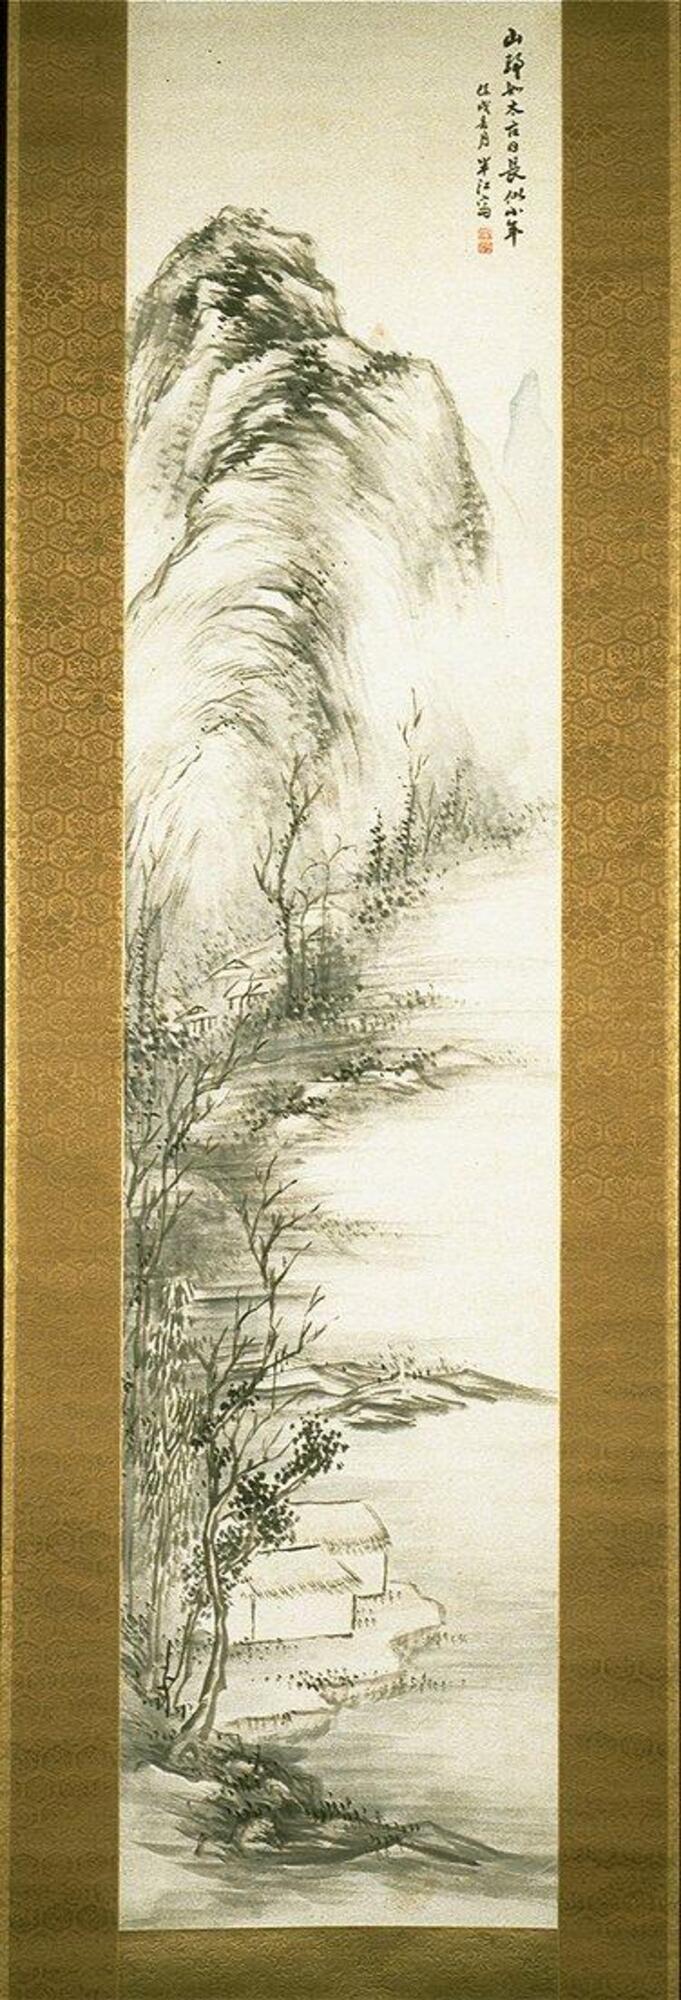 There are mountains in the background that run along a river. These mountains slowly turn into trees, many without leaves. There are two houses along the waterside, partially hidden behind the trees. There is an inscription and two seals in the upper right corner. The hanging scroll is bordered in gold.